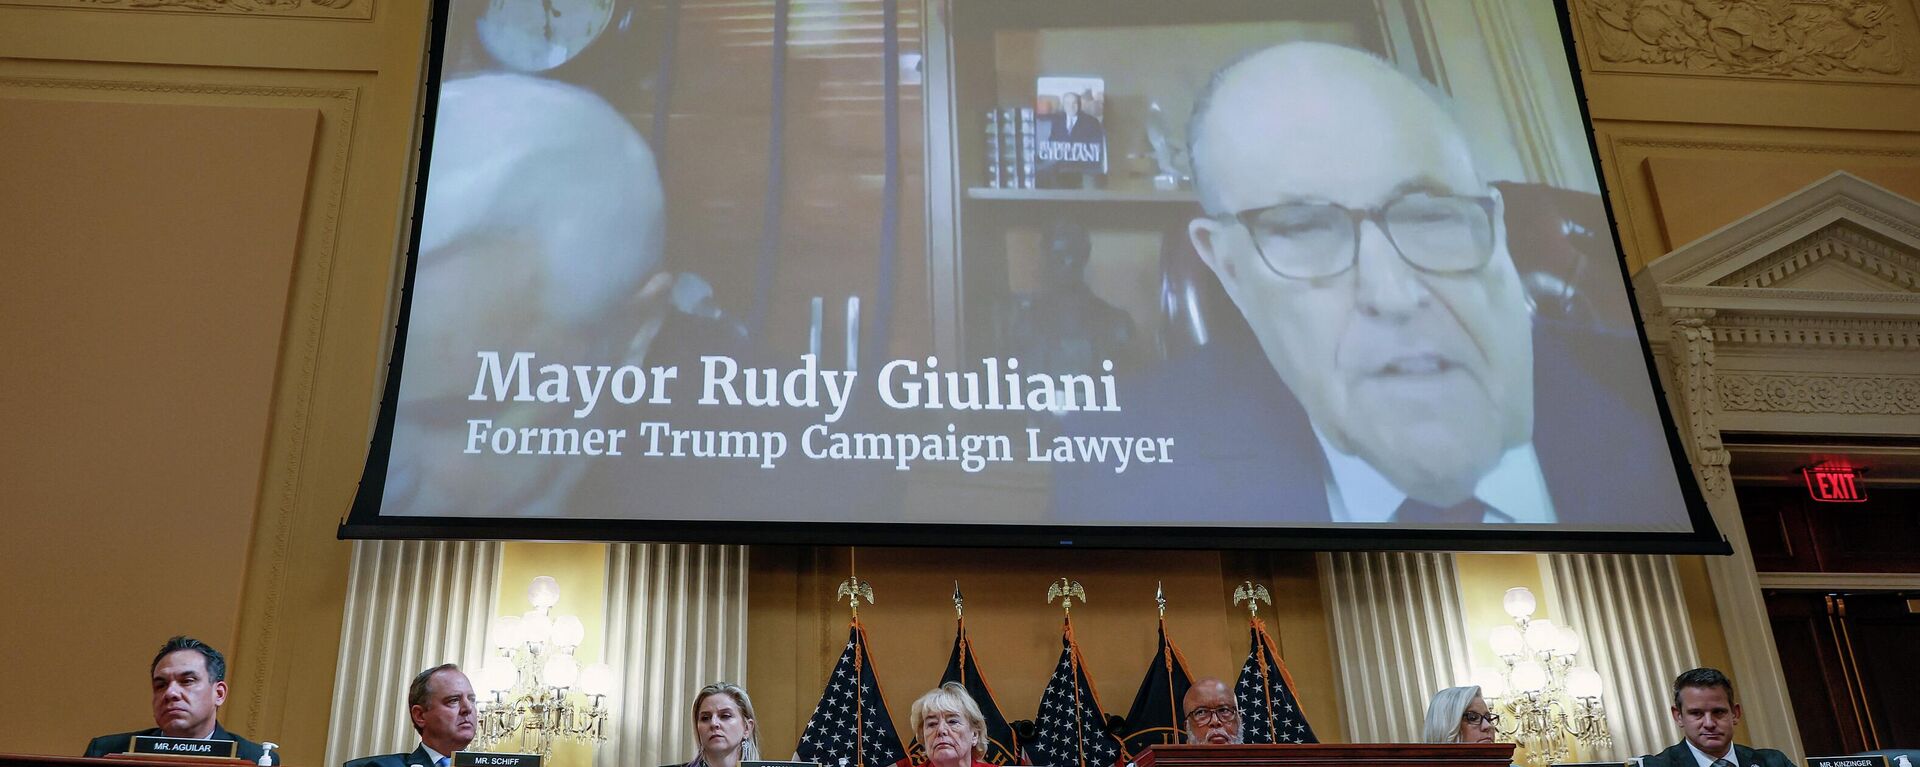 WASHINGTON, DC - JUNE 13: Video from a deposition with former President Trump advisor Rudy Giuliani is played during a hearing by the Select Committee to Investigate the January 6th Attack on the U.S. Capitol in the Cannon House Office Building on June 13, 2022 in Washington, DC.  - Sputnik International, 1920, 14.06.2022